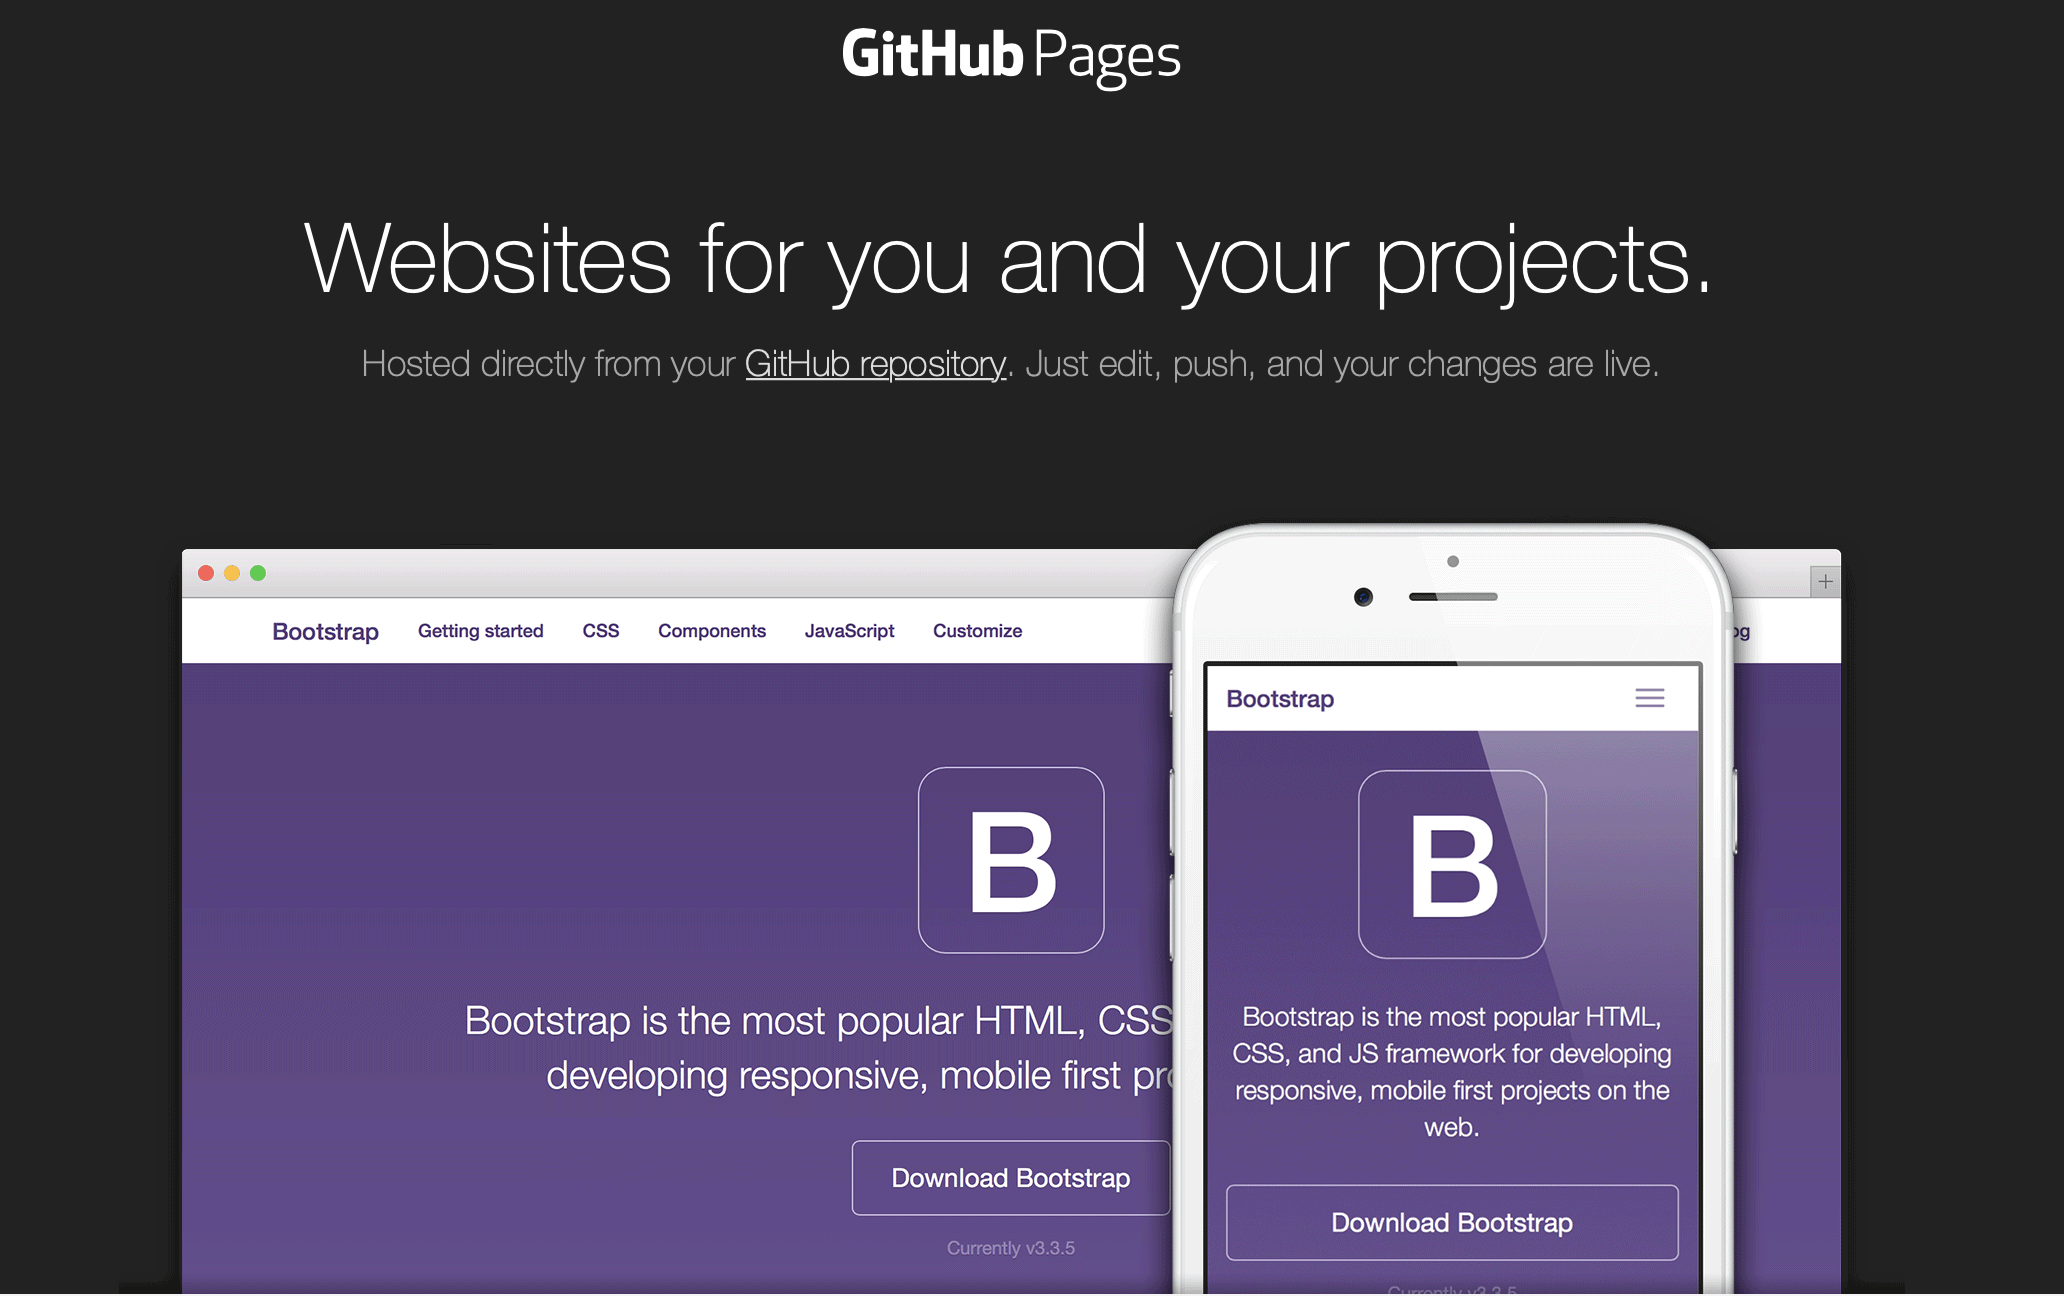 Github Pages website screenshot